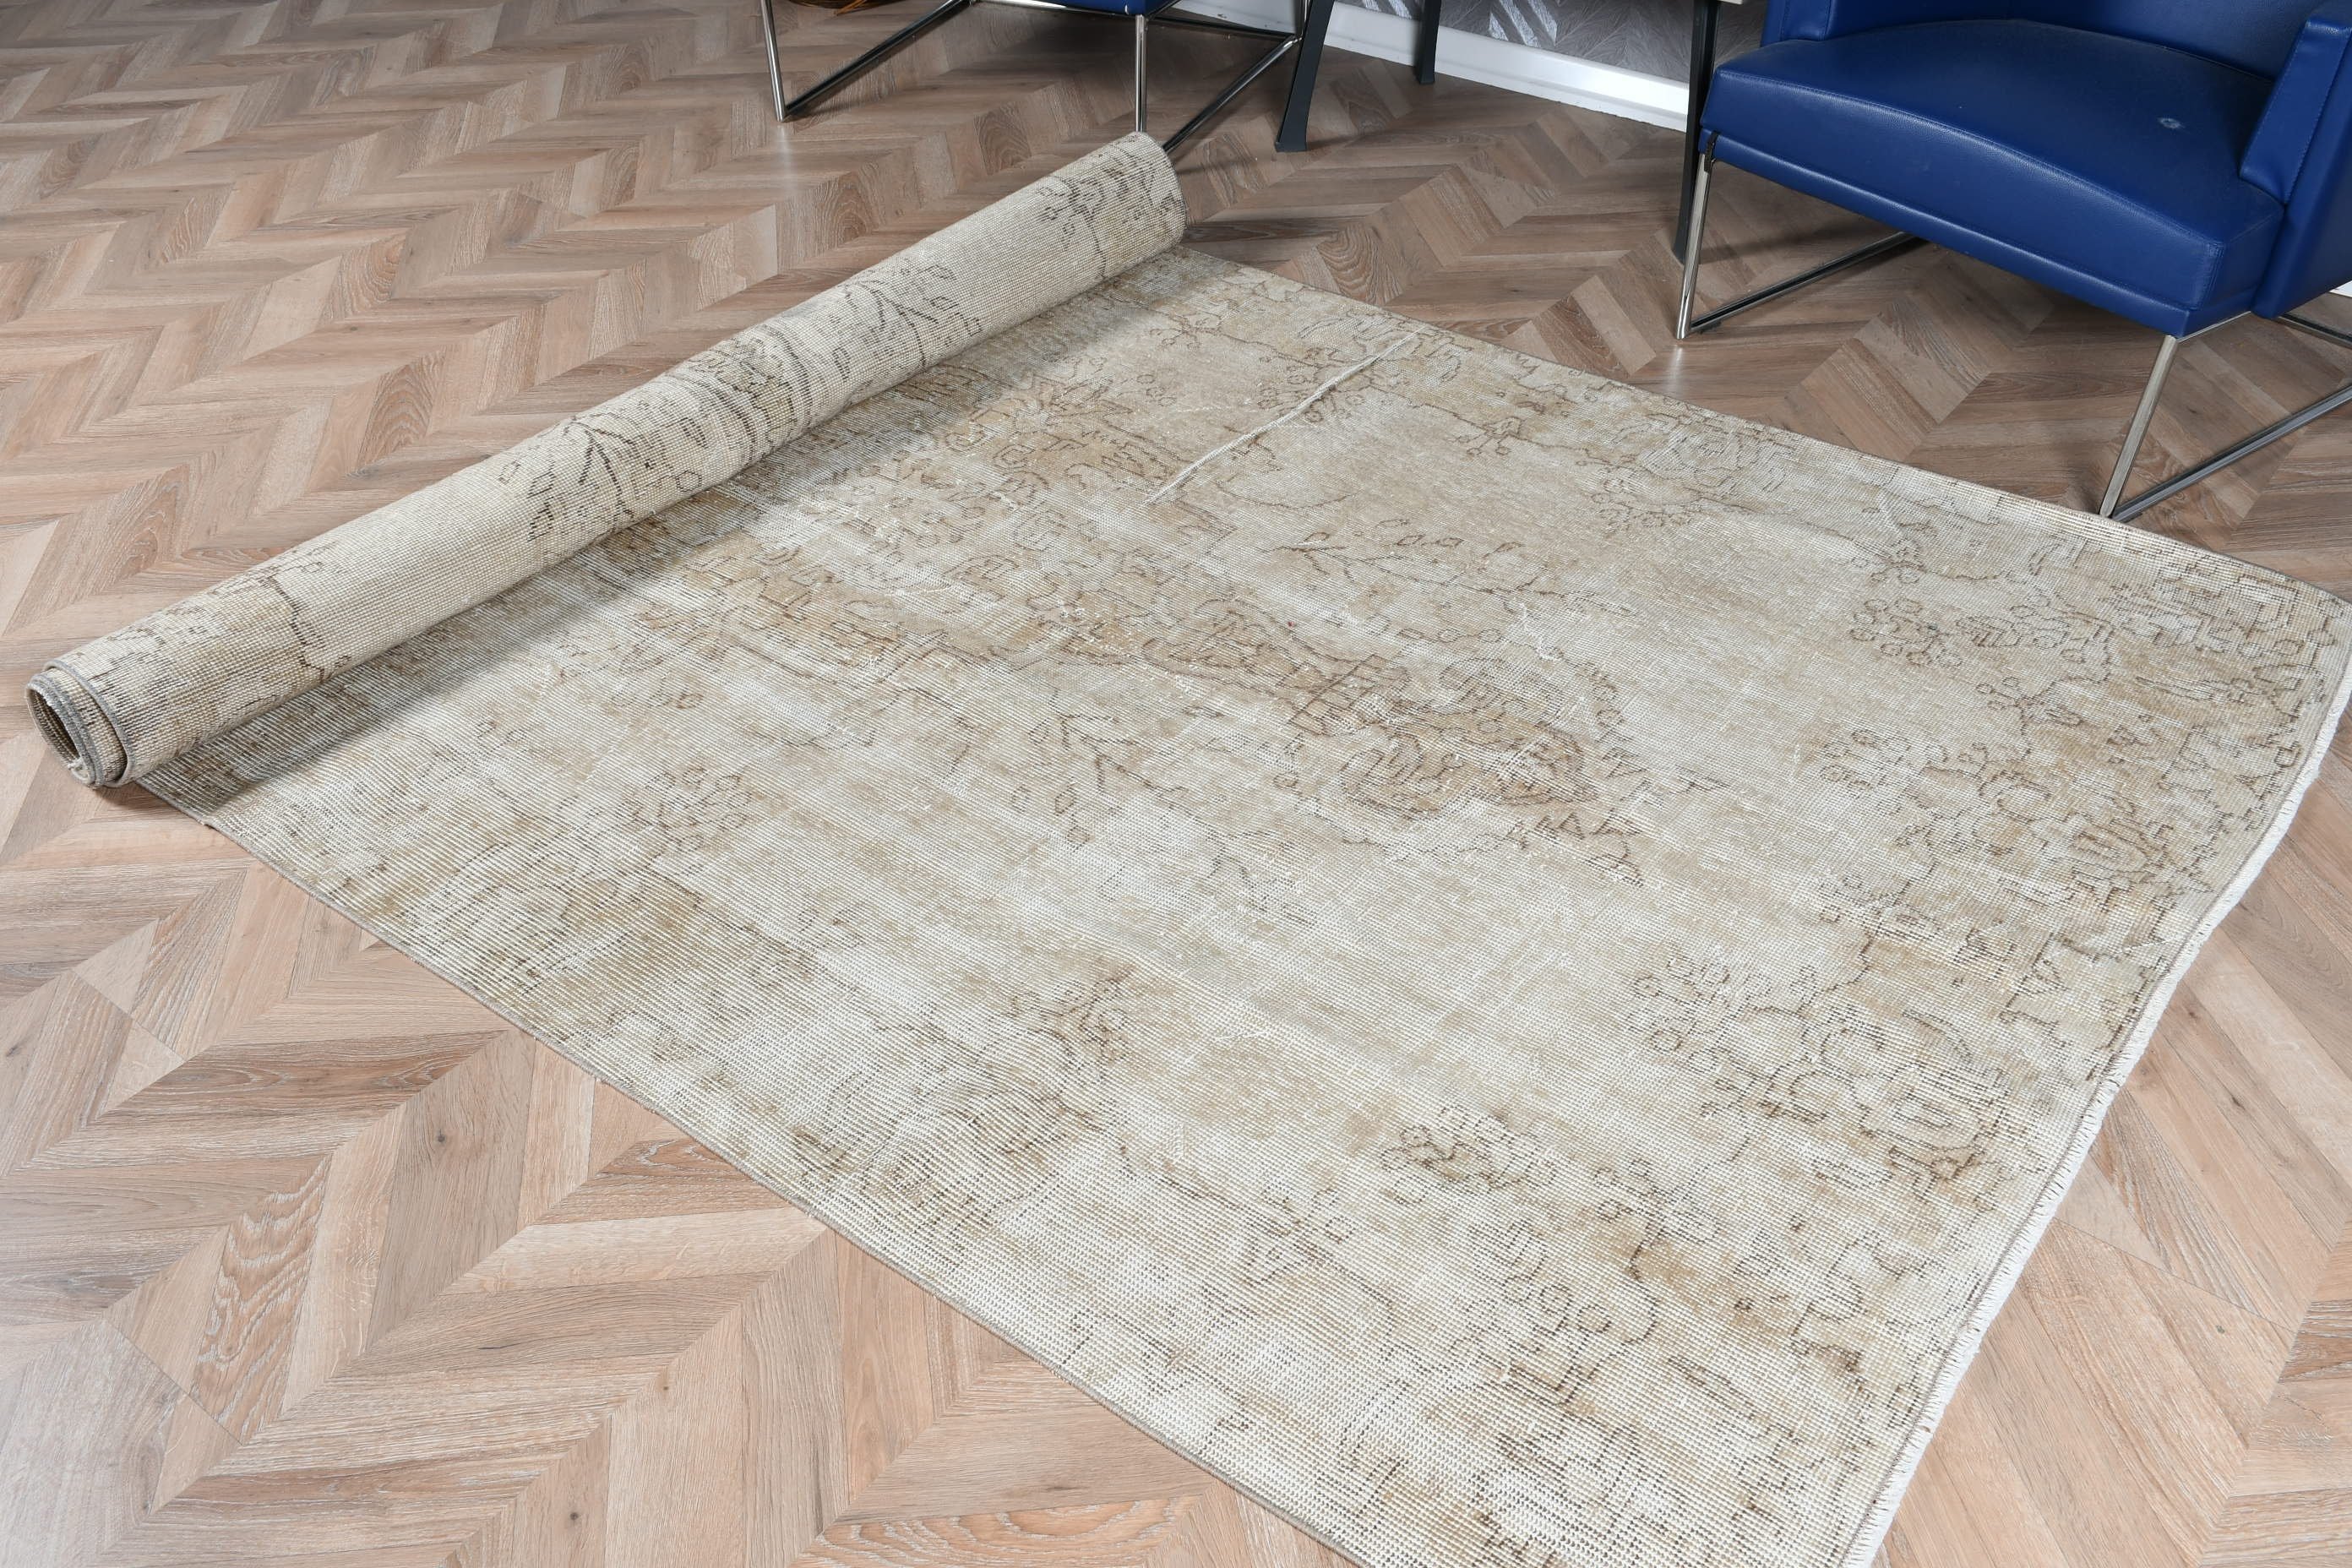 Beige Kitchen Rugs, Cool Rug, 5.5x9.9 ft Large Rug, Dining Room Rug, Salon Rugs, Vintage Rugs, Turkish Rug, Home Decor Rugs, Retro Rugs